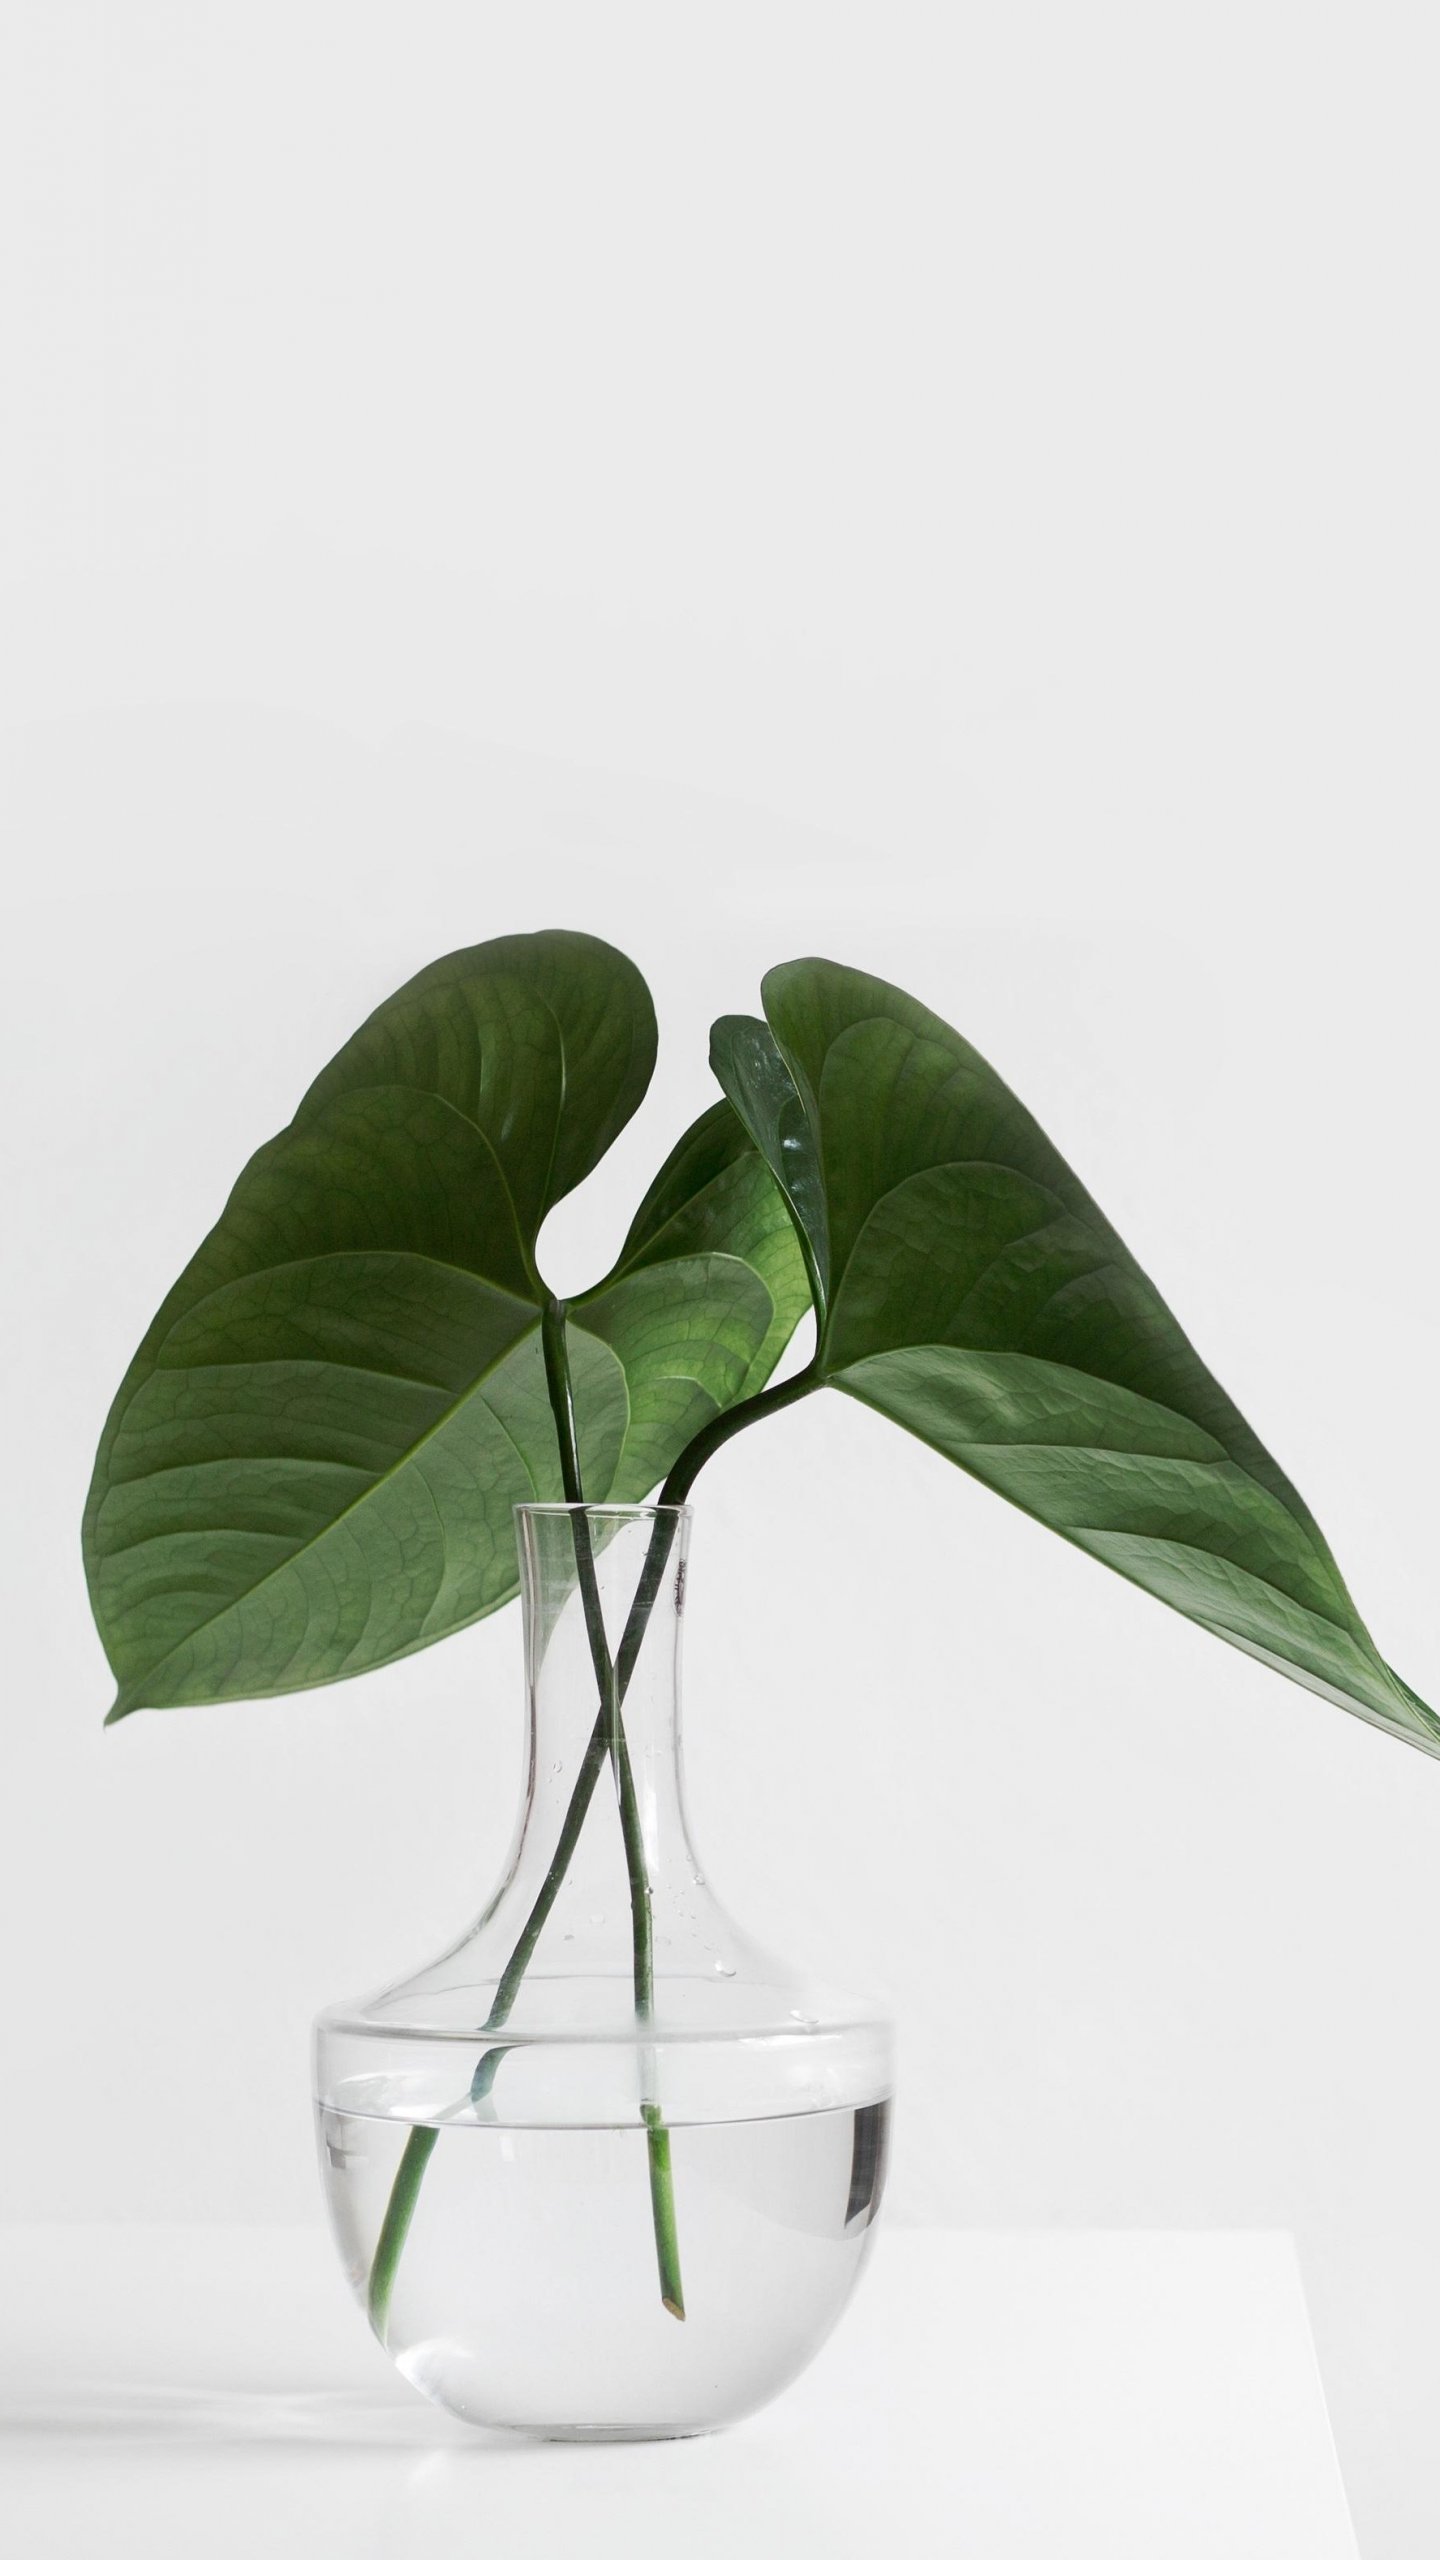 Minimalist Aesthetic Plant in Clear Vase Wallpaper  iPhone Android   Desktop Backgrounds